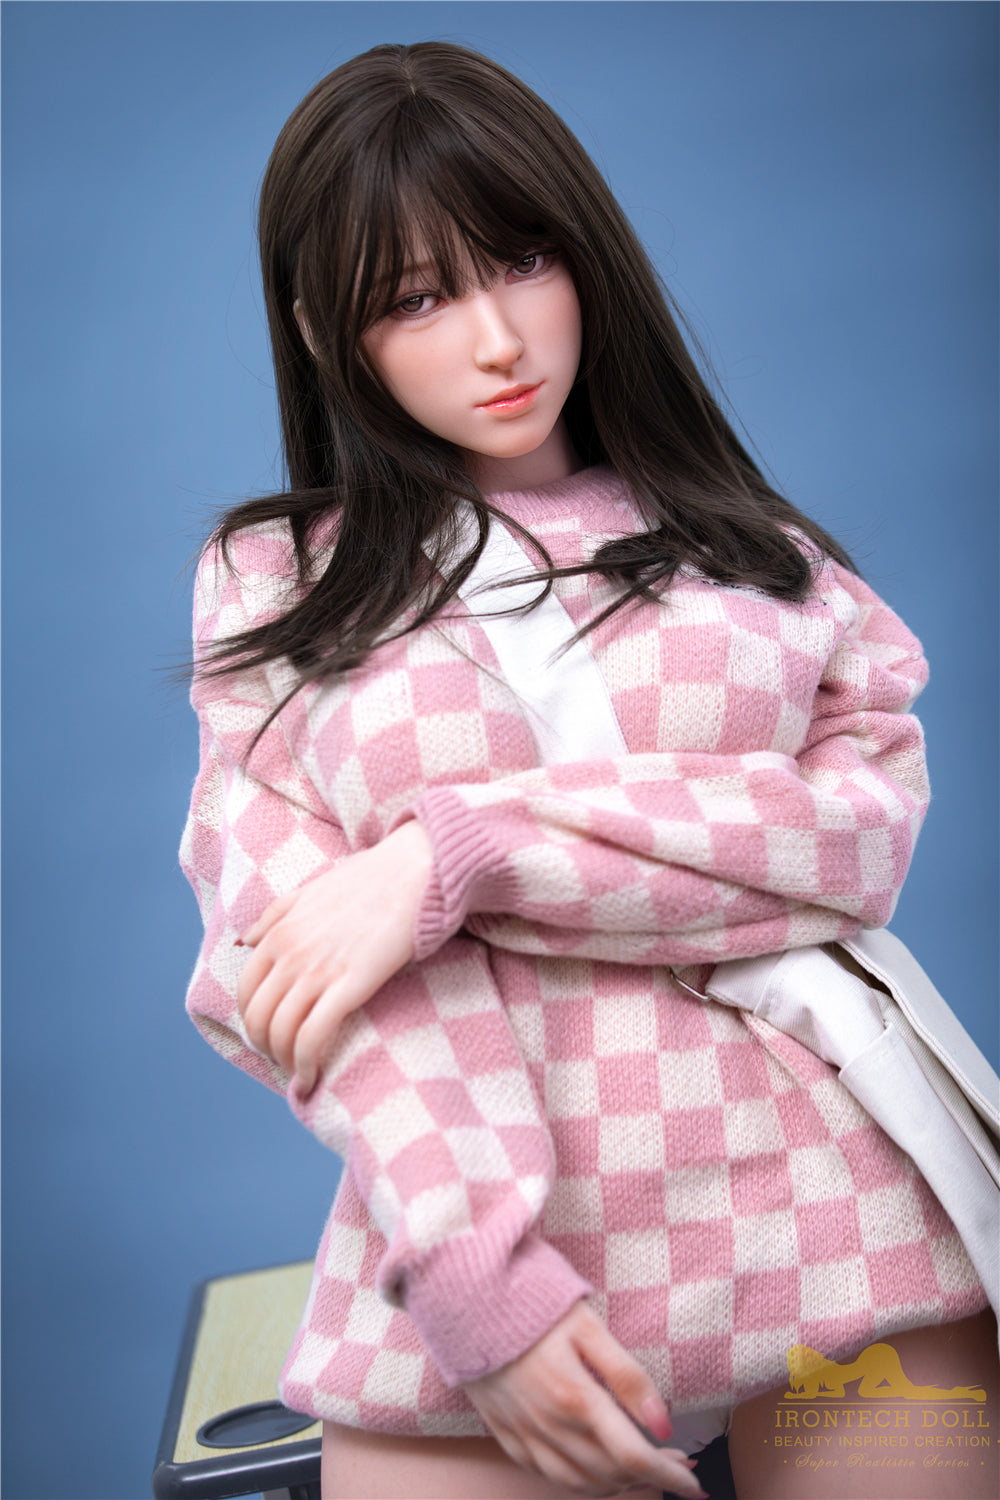 Irontech - Silicone Real Love Doll - 5ft 1in (153cm) - Samantha - Love Dolls 4U